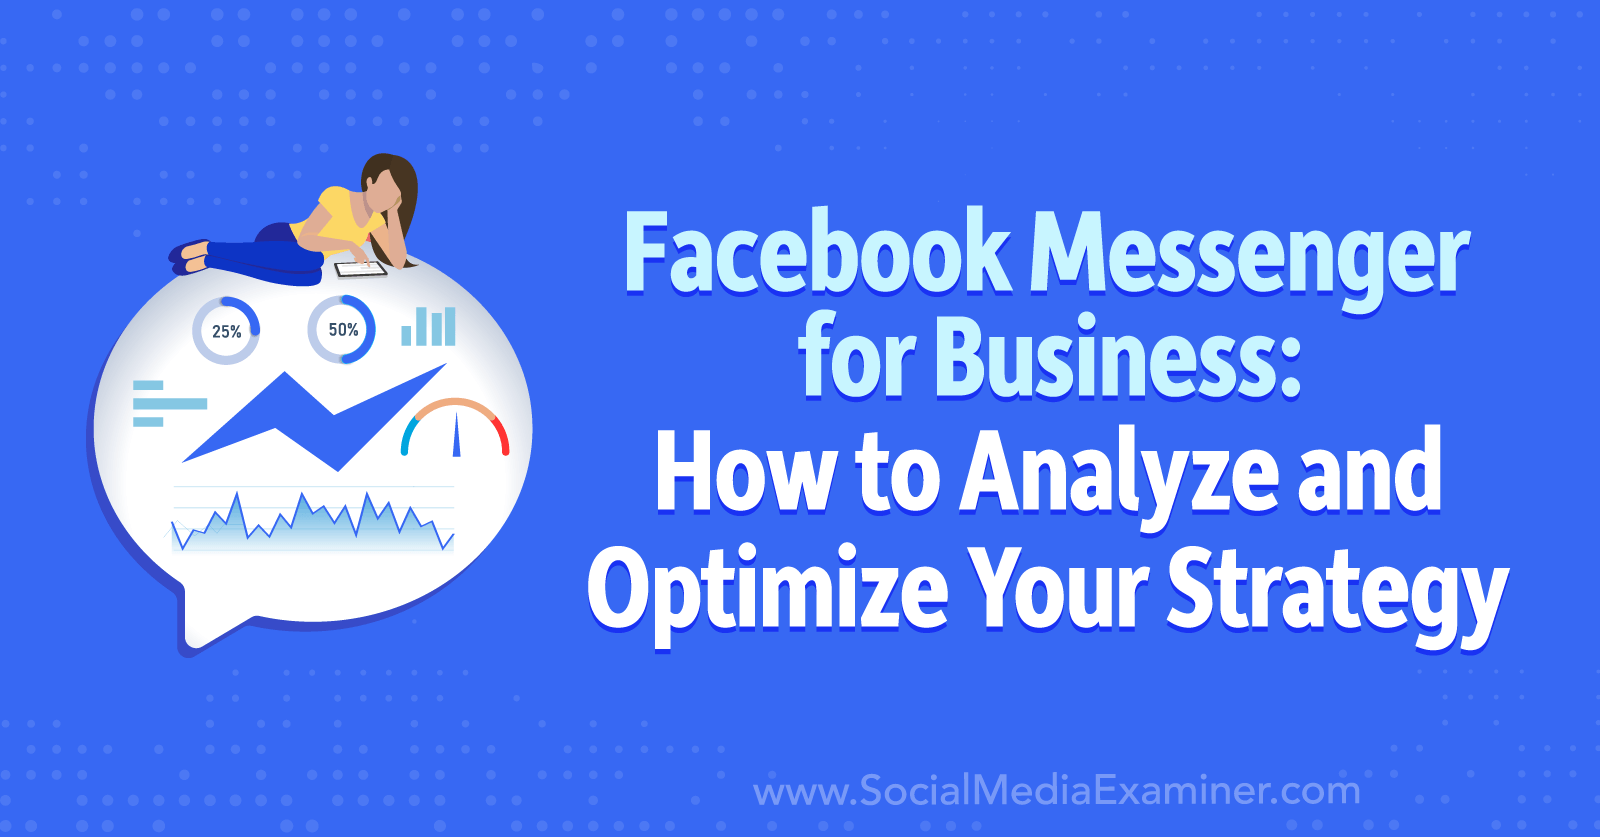 Facebook Messenger for Business: How to Analyze and Optimize Your Strategy by Social Media Examiner